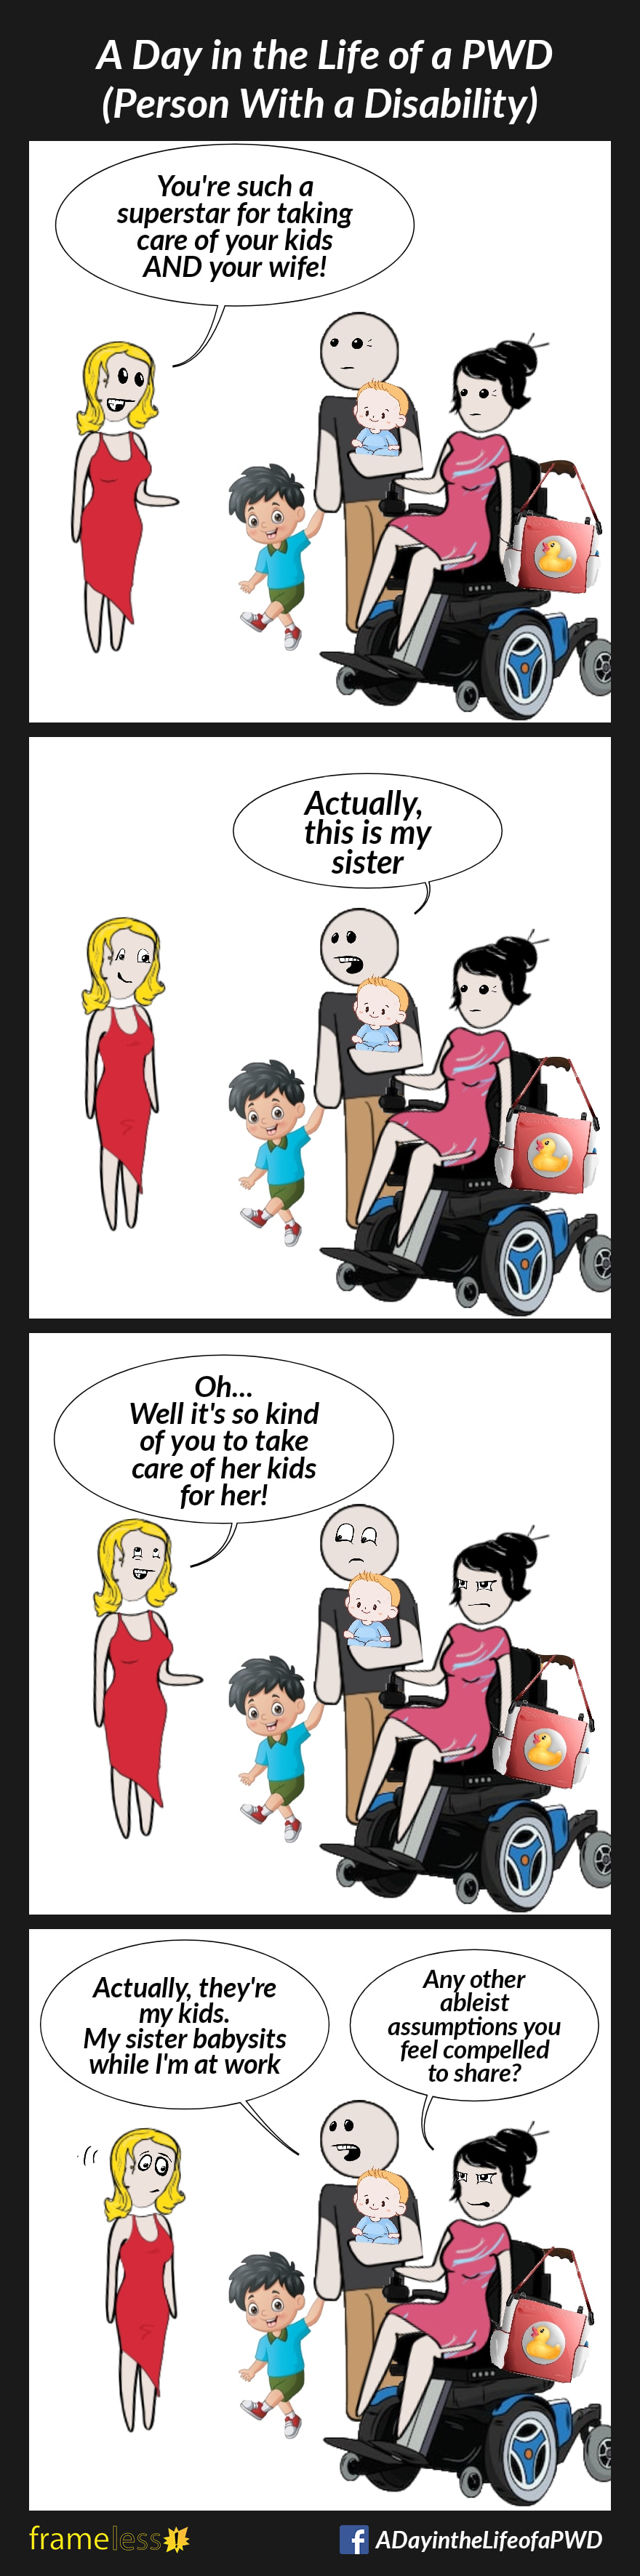 COMIC STRIP 
A Day in the Life of a PWD (Person With a Disability) 

Frame 1:
A woman in a power wheelchair is with a man who is carrying an infant in one arm and holding the hand of a young boy. A diaper bag hangs on the back of her chair.
A stranger approaches them.
STRANGER (to man): You're such a superstar for taking care of your kids AND your wife!

Frame 2:
MAN: Actually, this is my sister

Frame 3:
STRANGER: Oh...Well, it's so kind of you to take care of her kids for her!

Frame 4:
MAN: Actually, they're my kids. My sister babysits while I'm at work
WOMAN (mutters angrily): Any other ableist assumptions you feel compelled to share?